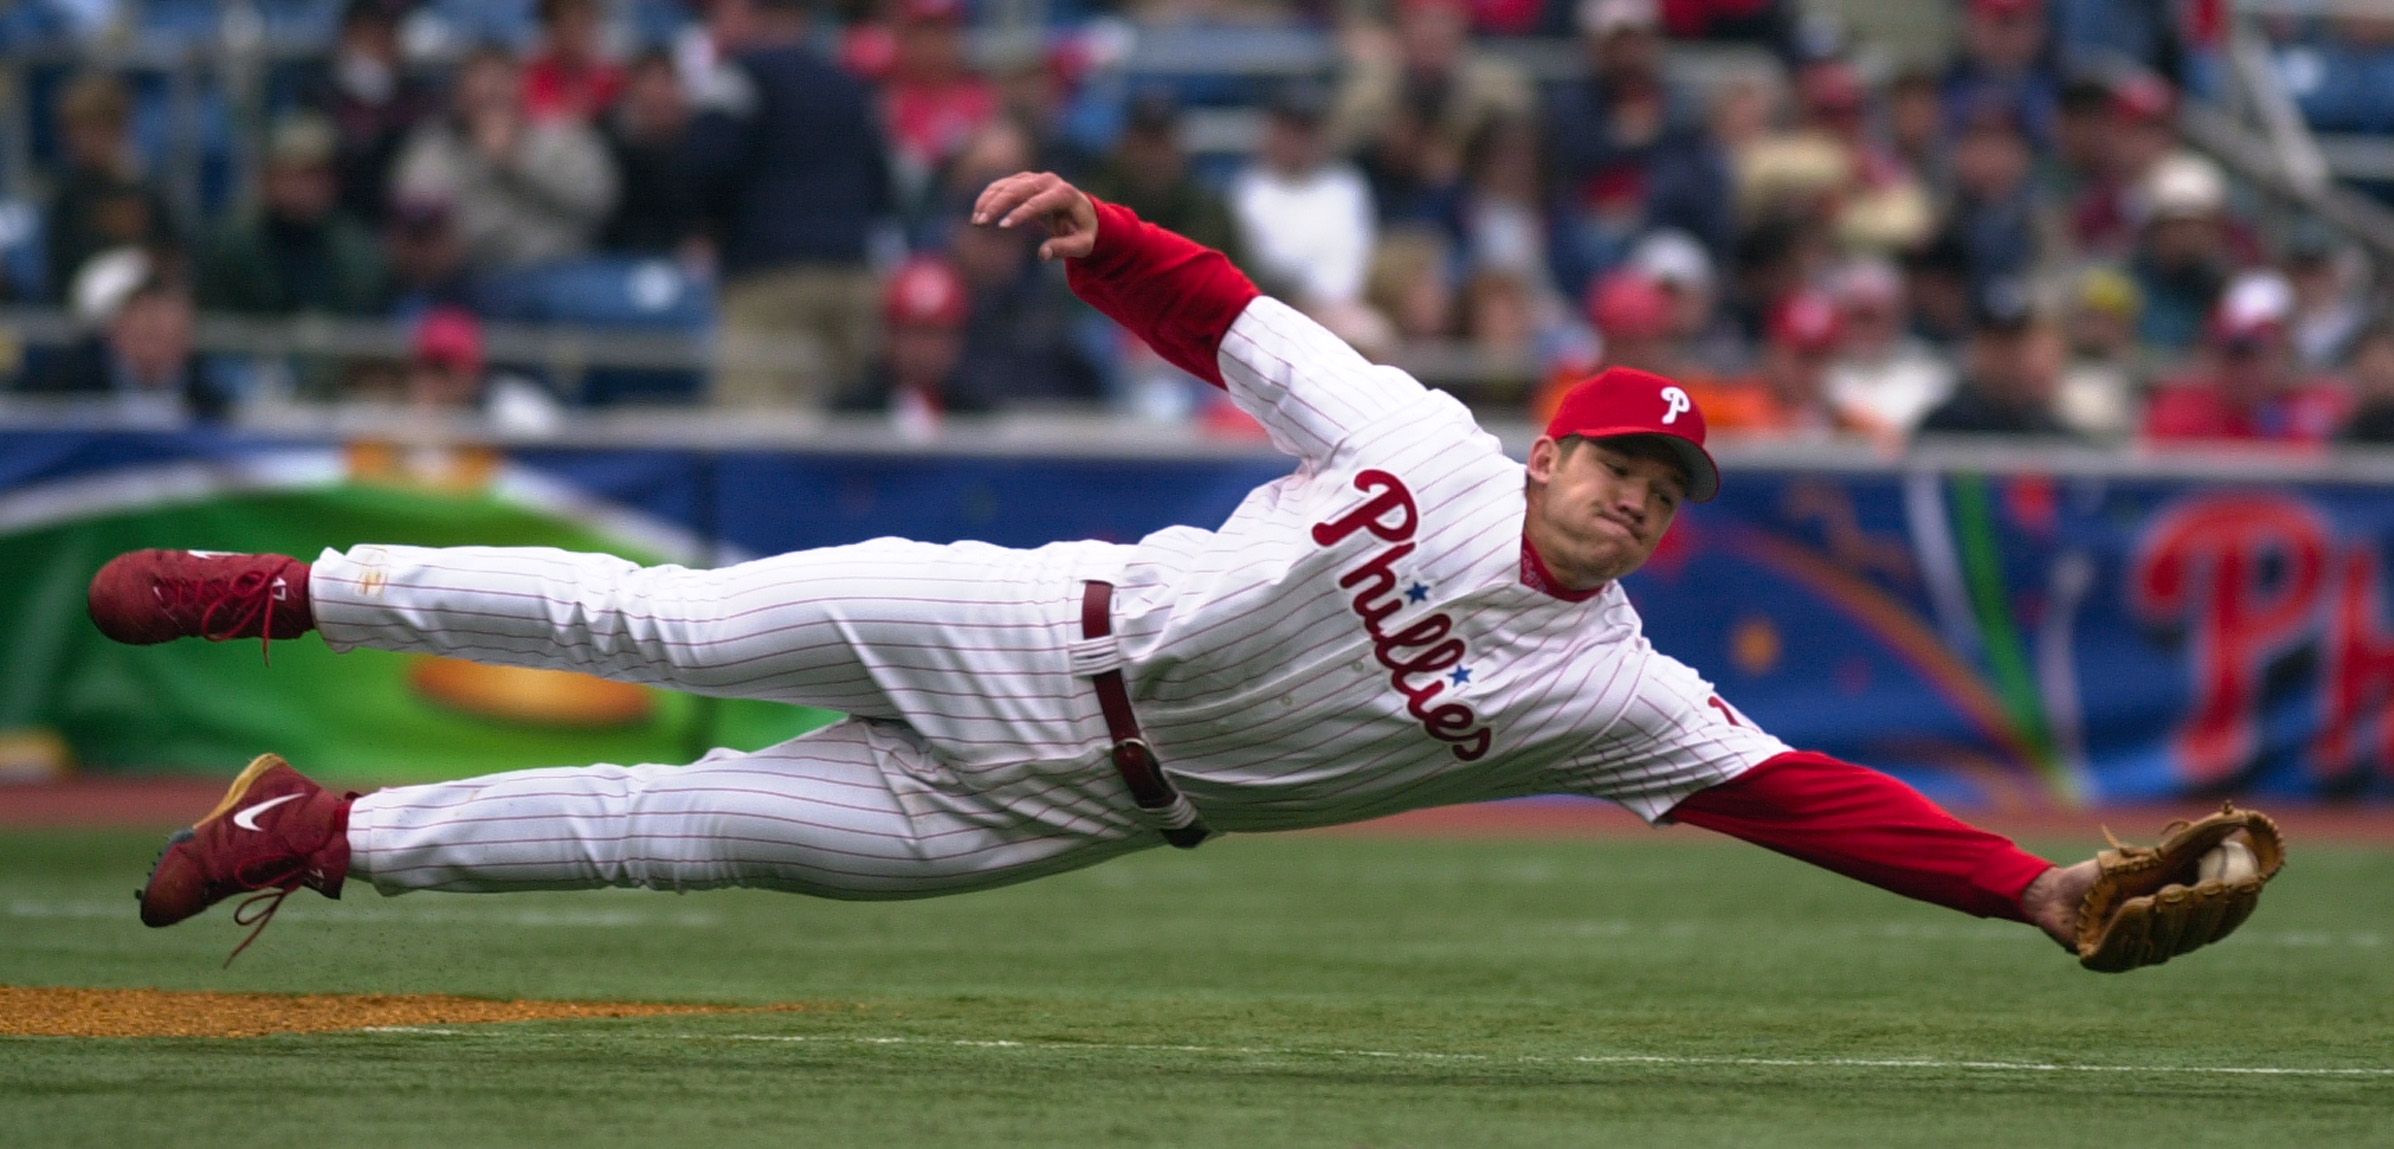 Phillies vs. Scott Rolen: At Hall of Fame induction, a history